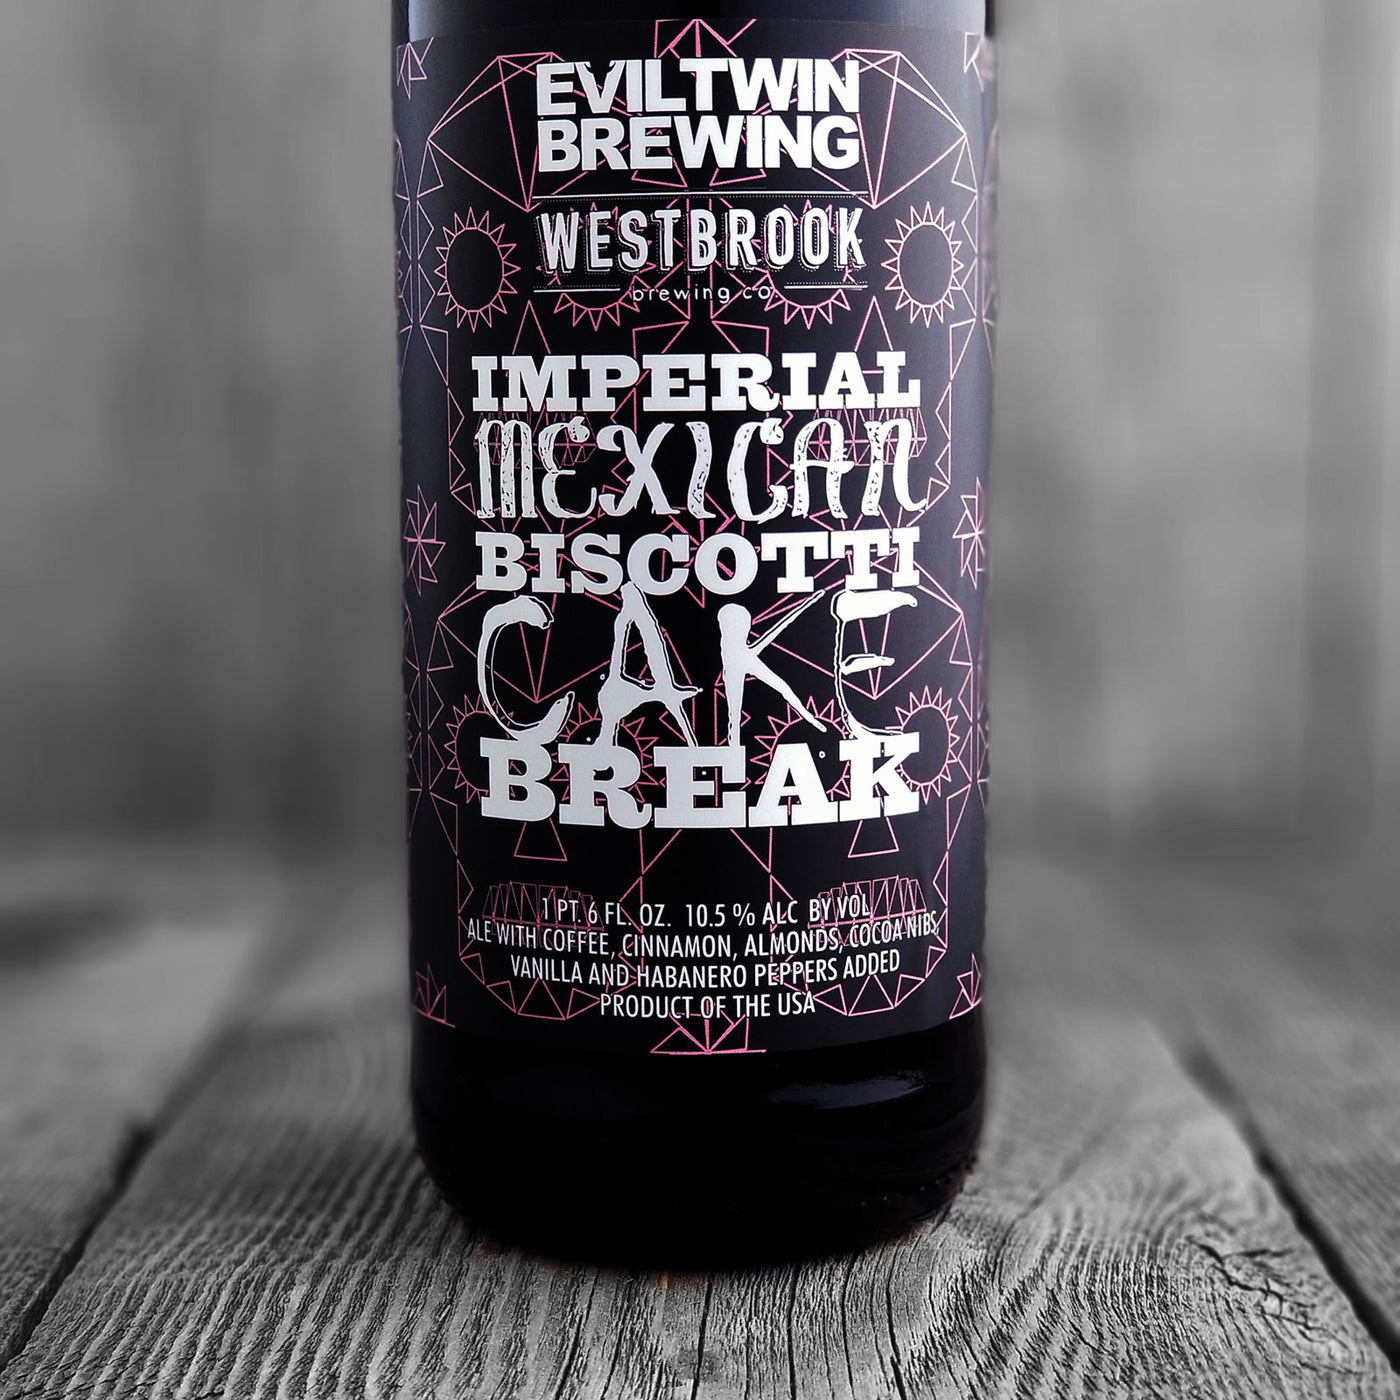 Evil Twin / Westbrook Imperial Mexican Biscotti Cake Break - Limit 1